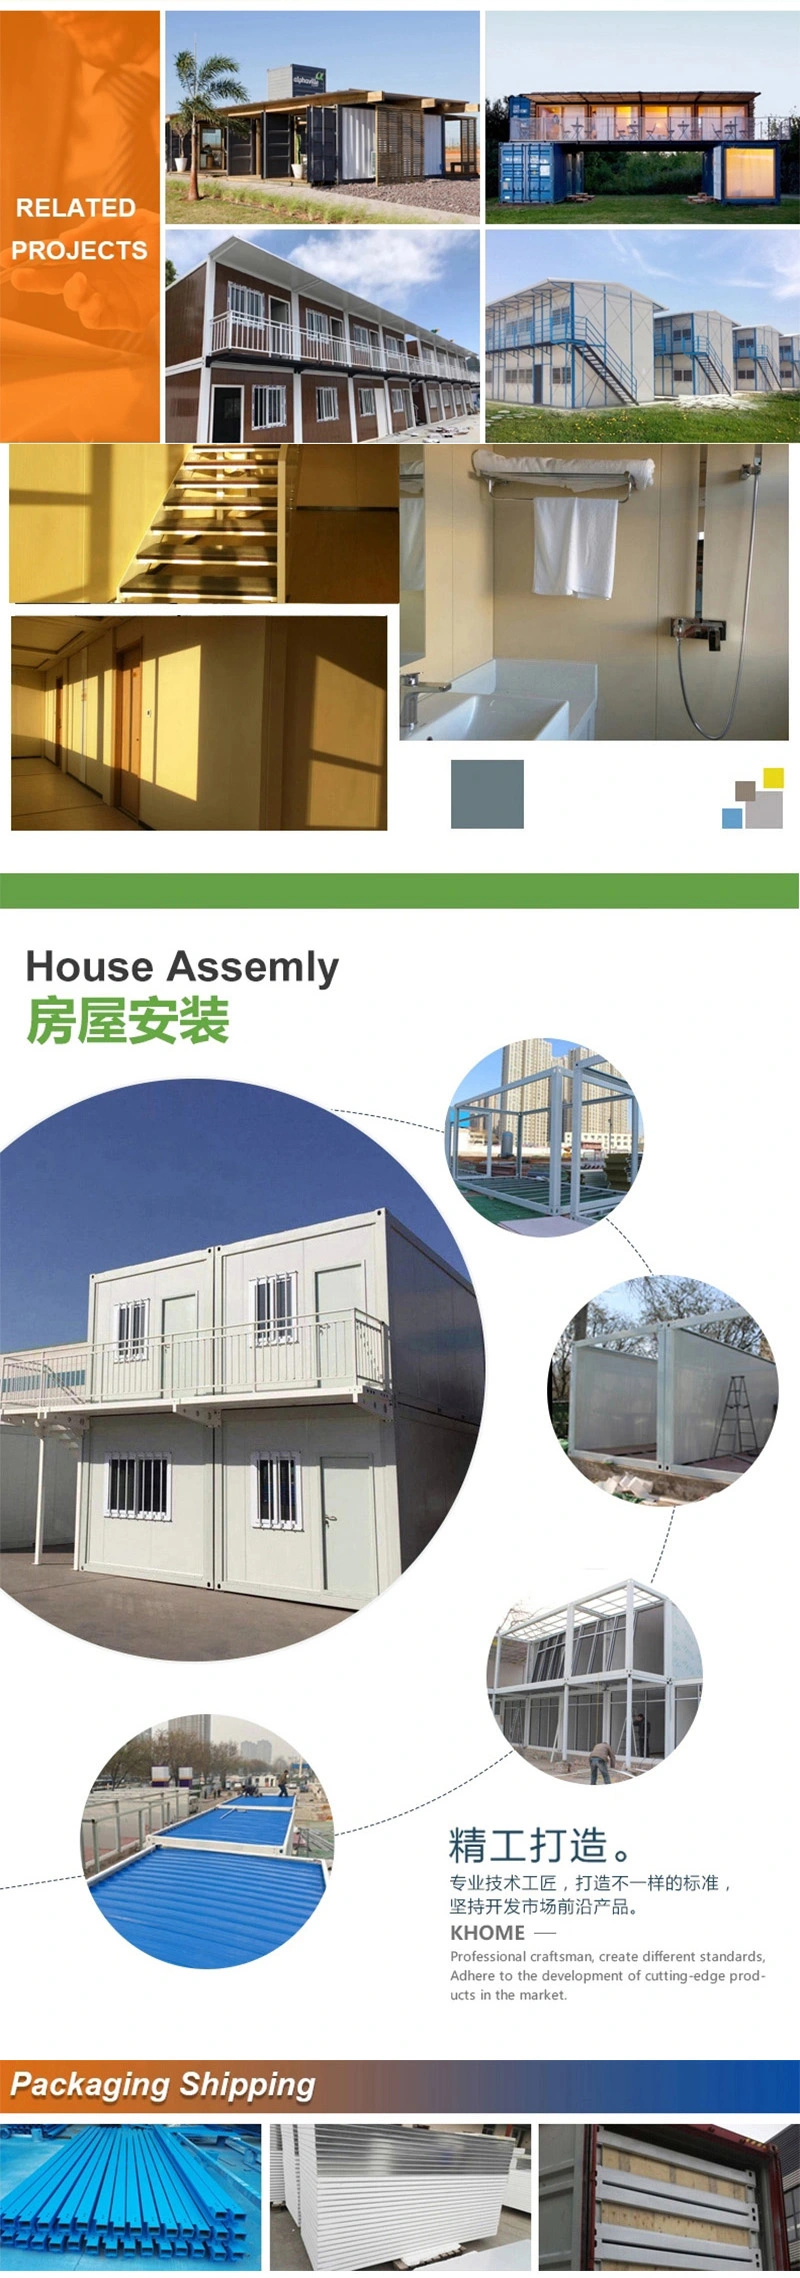 container house used for office,prefab mobile container house,prefab cabin container house,prefab container house suppliers,prefab container house offers